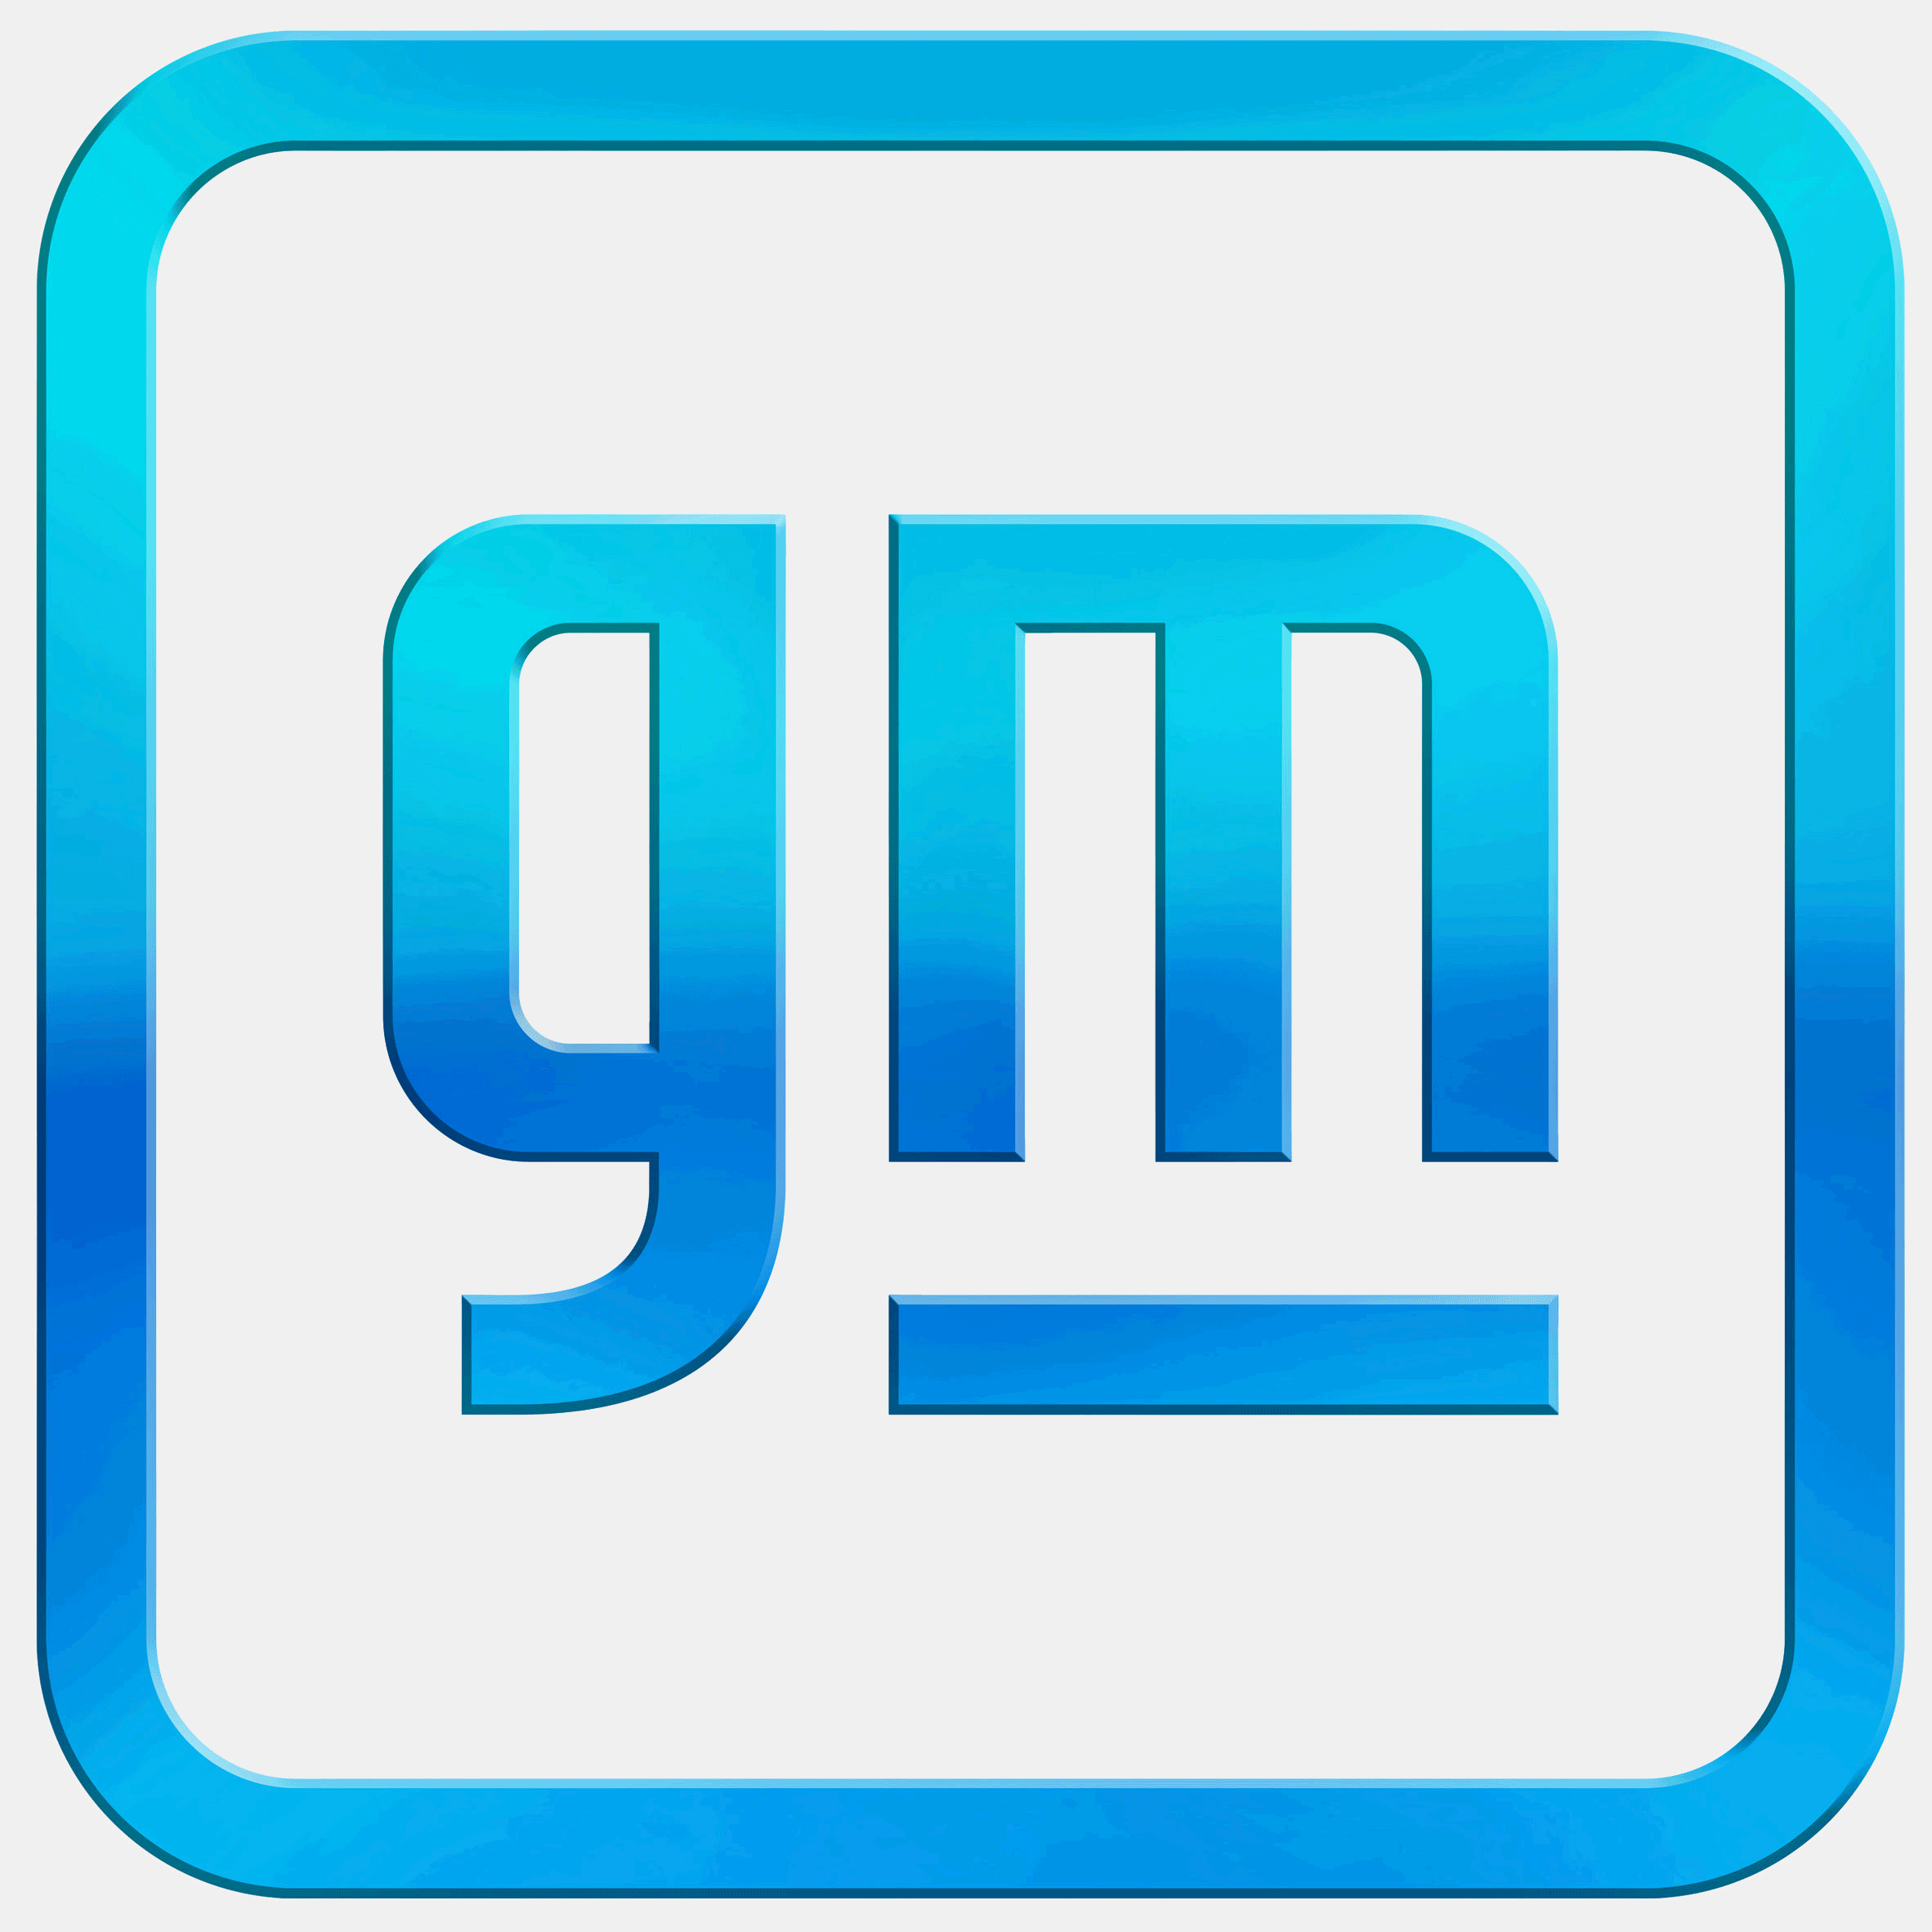 General Motors revamps logo to reflect drive towards "all-electric future"